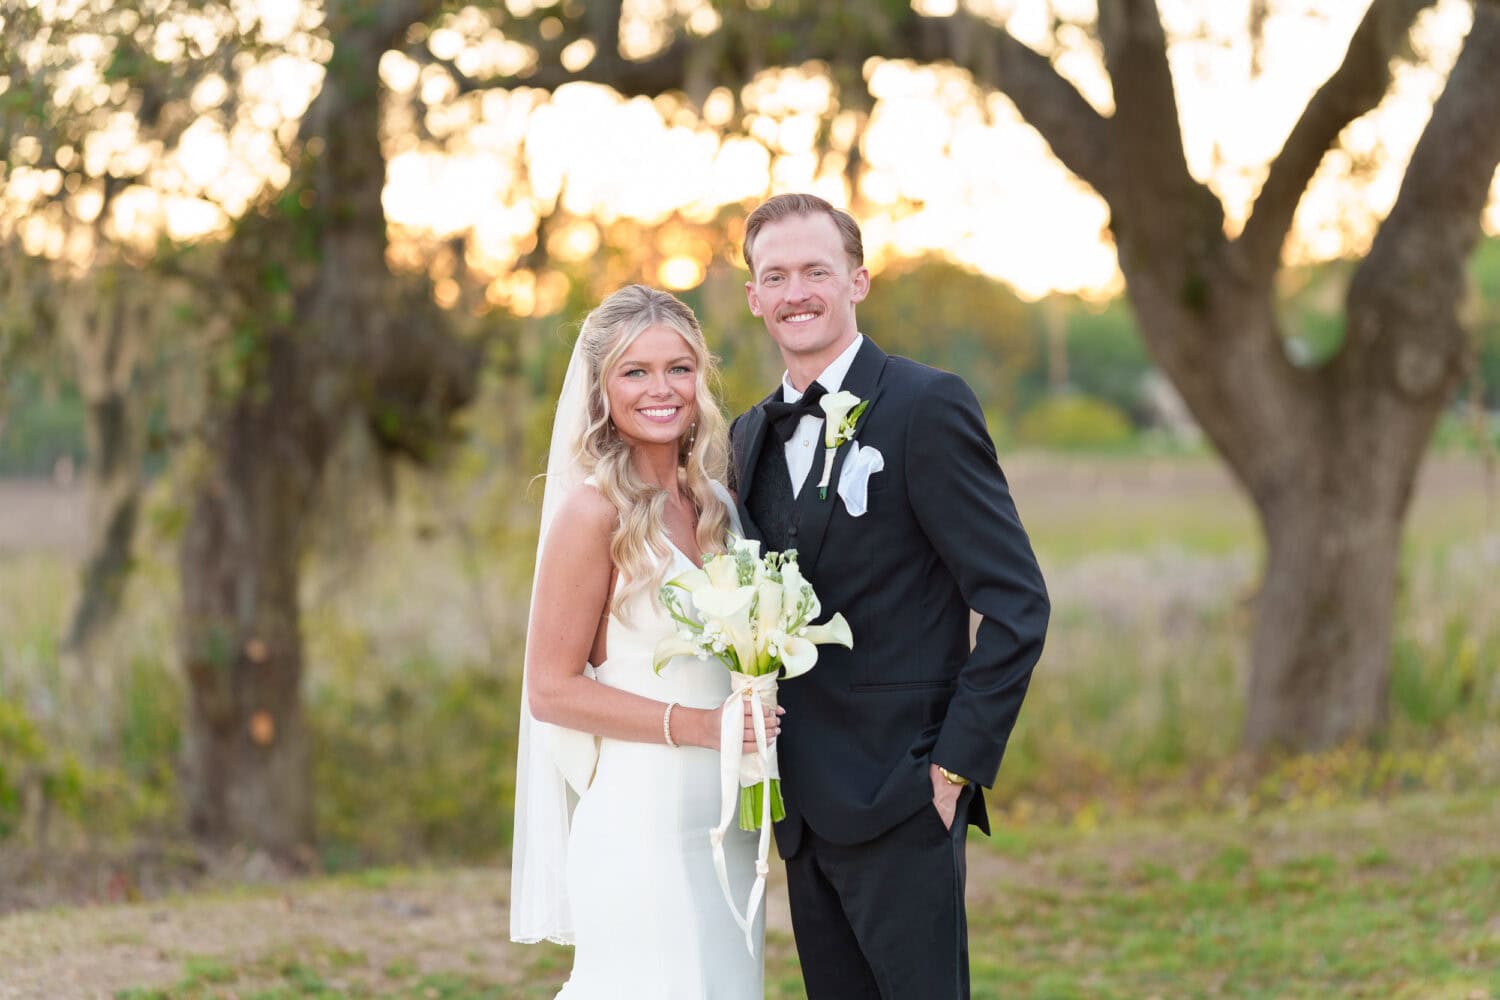 Big smiles in front of the sunset - Pawleys Plantation